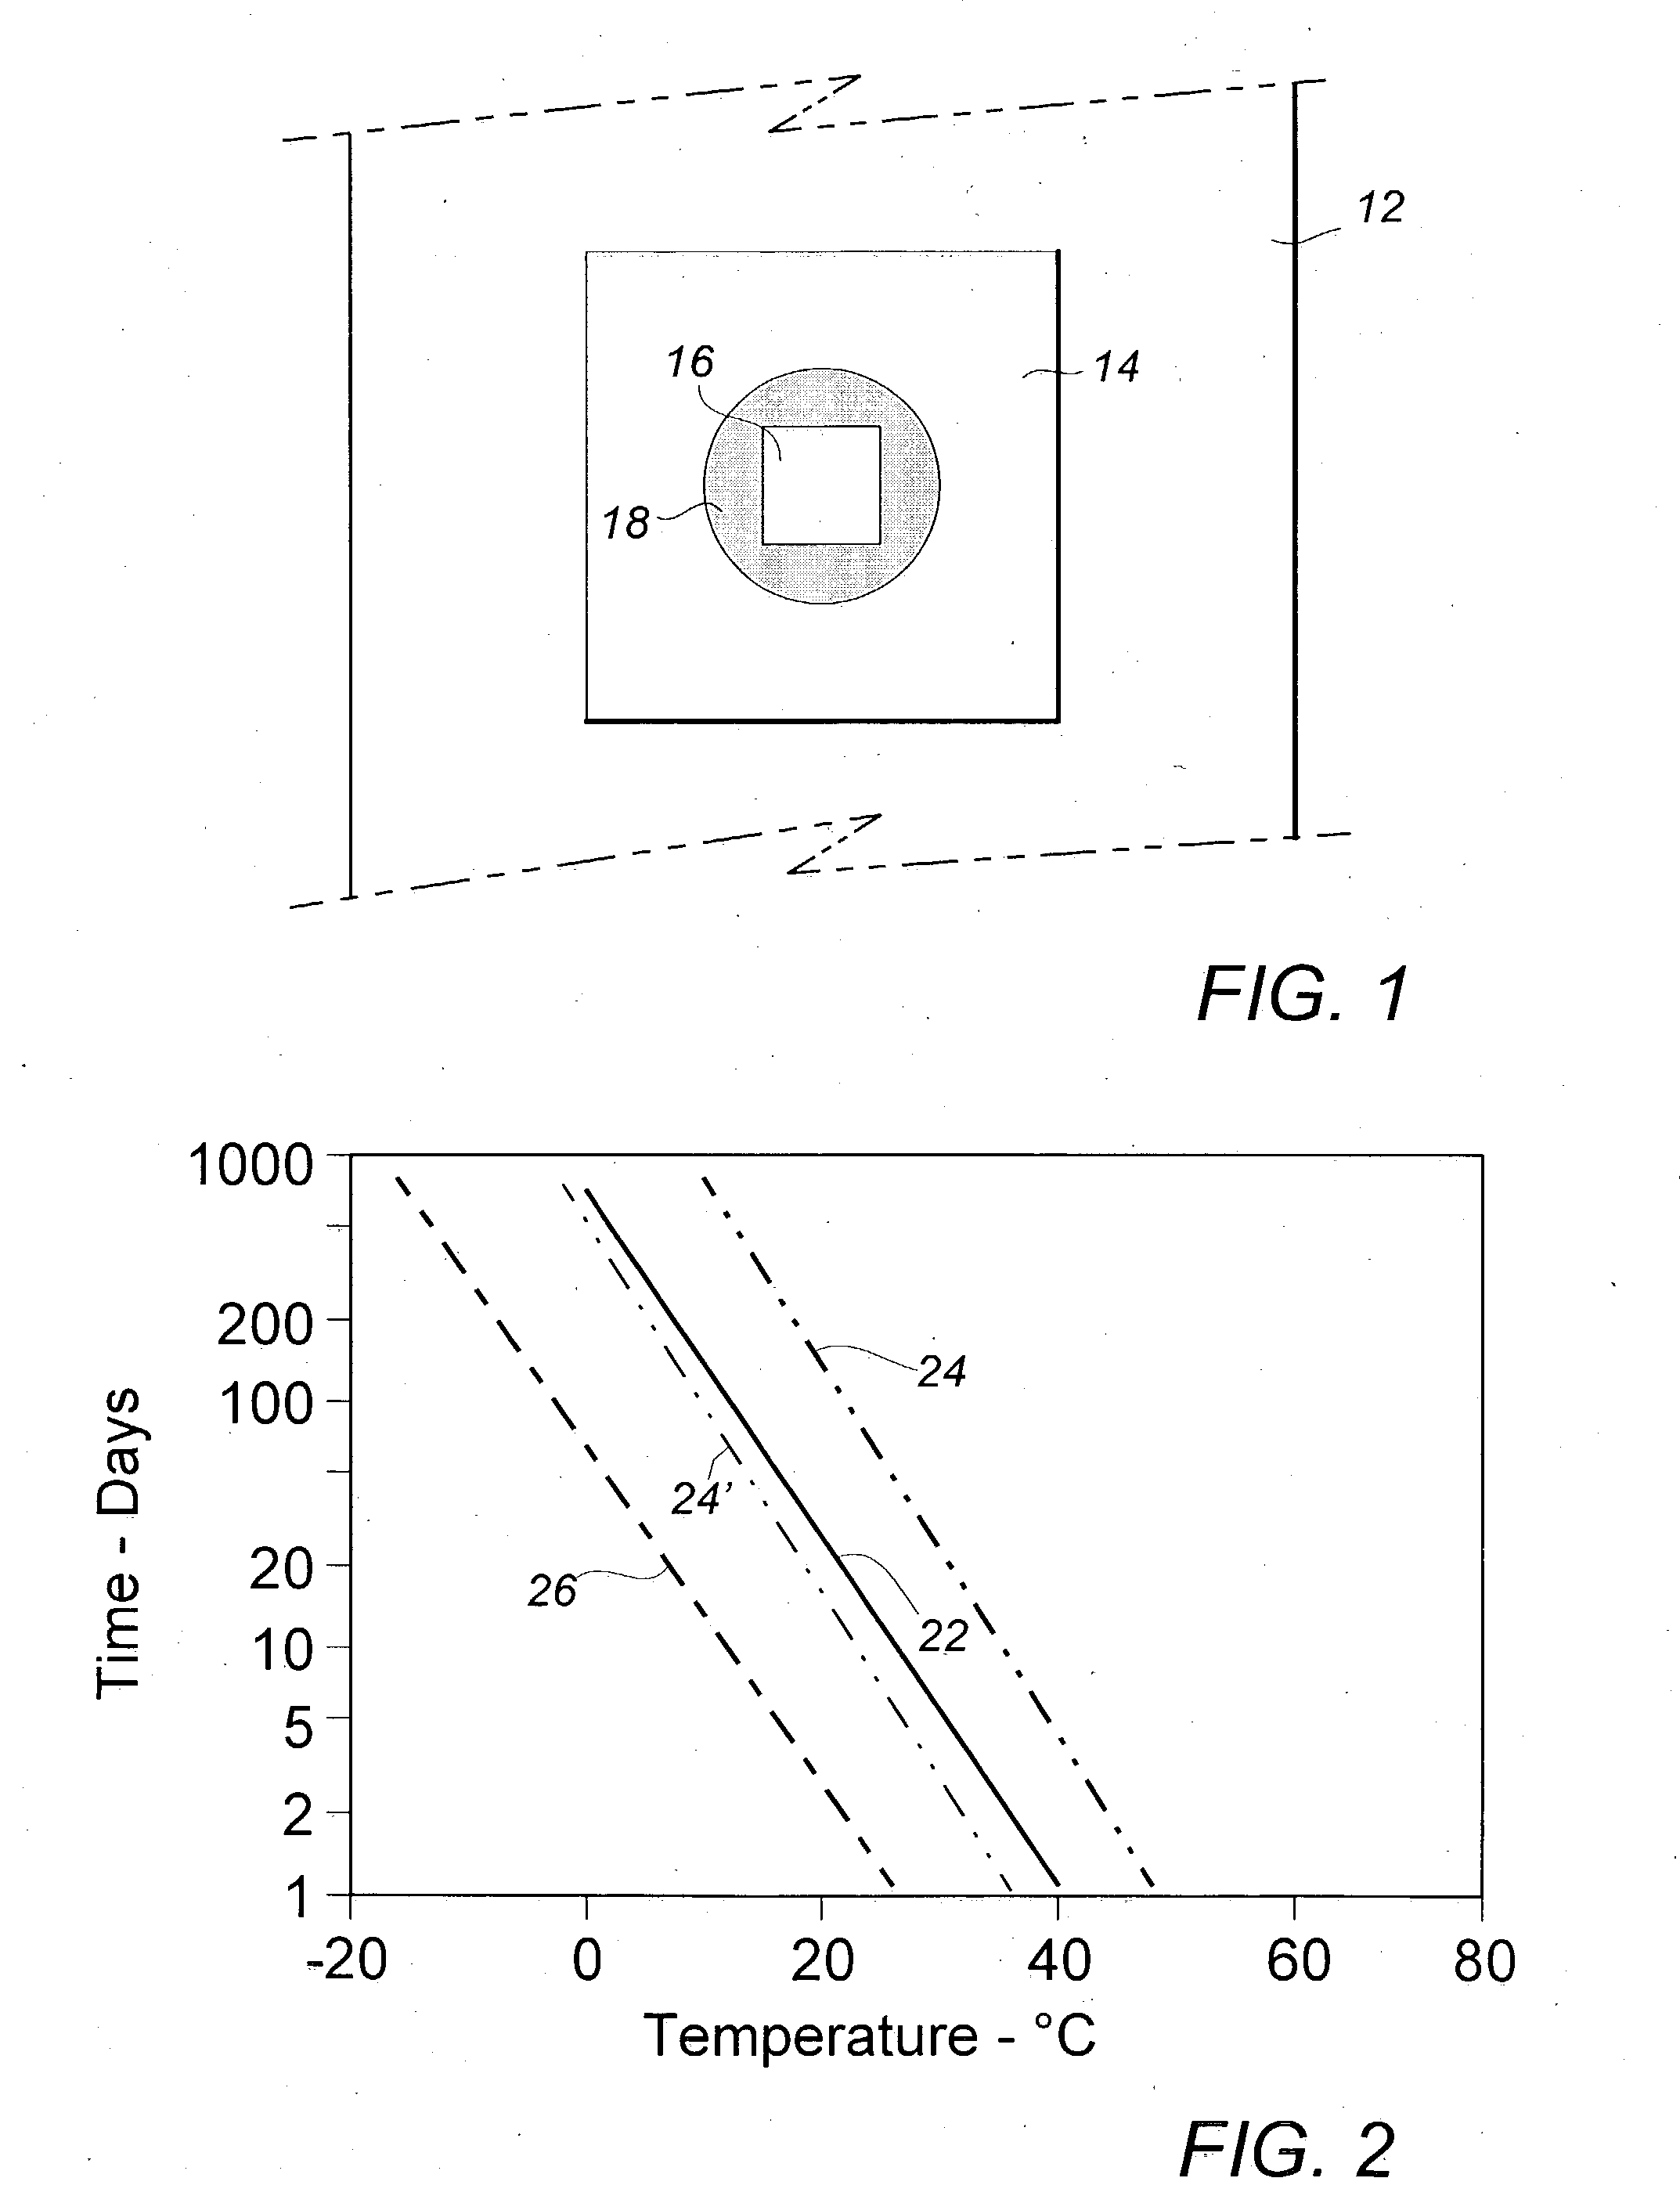 Reactivity control in substituted diacetylenic monomer shelf life monitoring systems